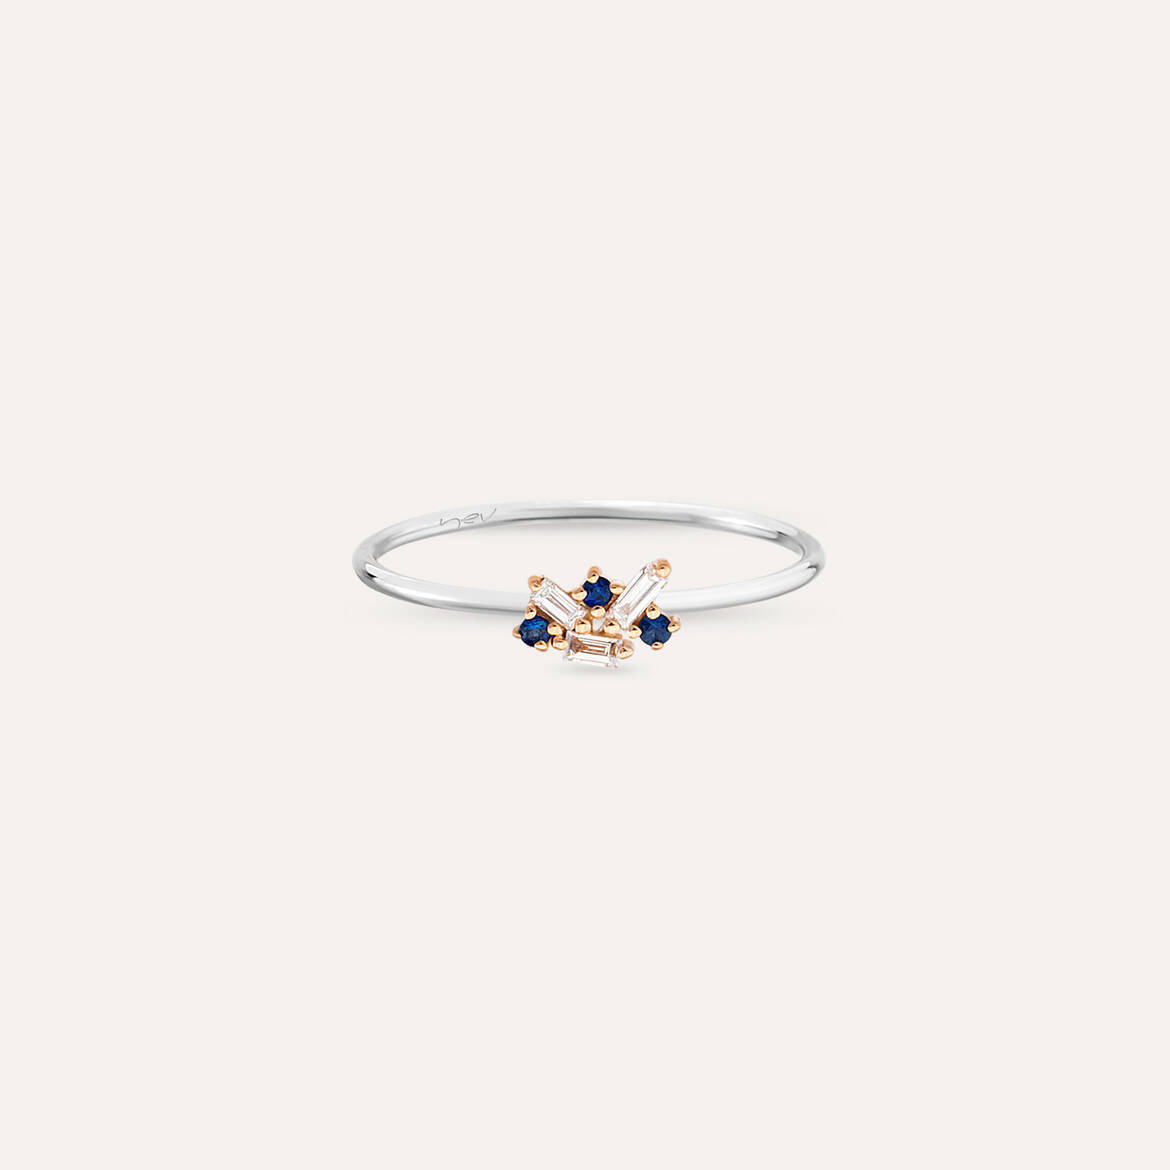 Seed 0.11 CT Blue Sapphire and Baguette Cut Diamond Ring